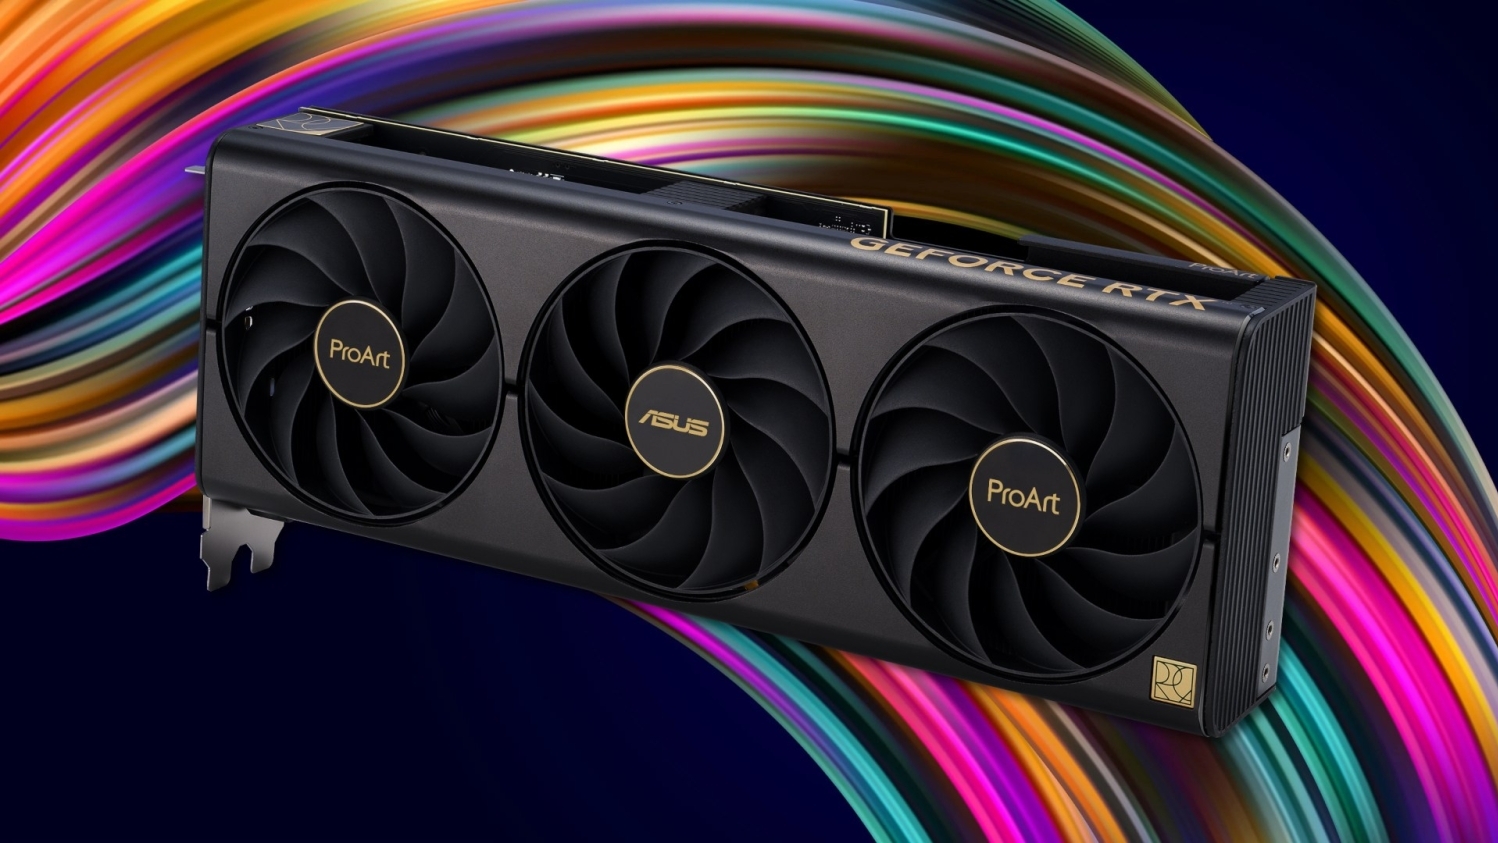 ASUS's new ProArt GeForce RTX 4080 and 4070 Ti graphics cards are